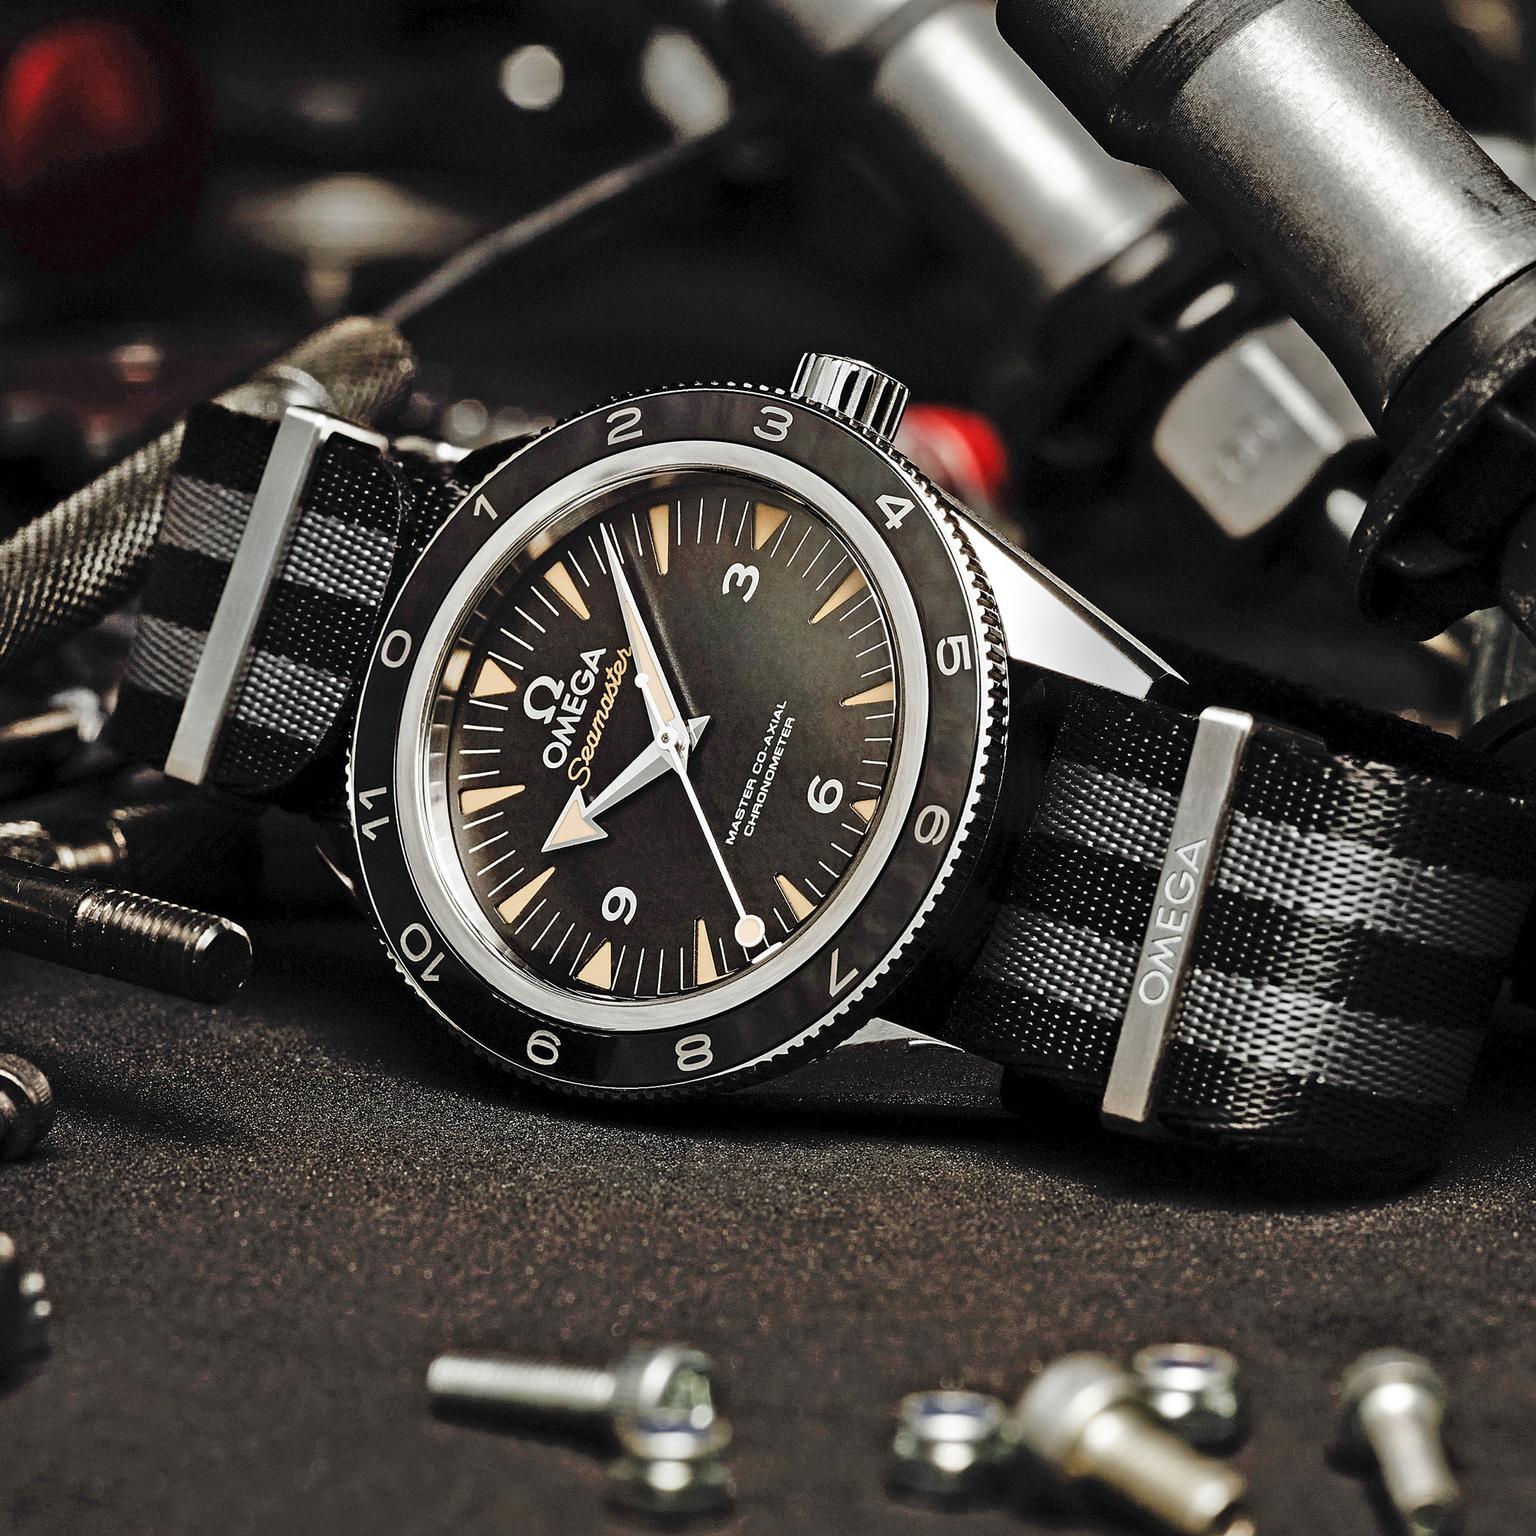 Why should you wear a NATO watch strap? Including how to wear a